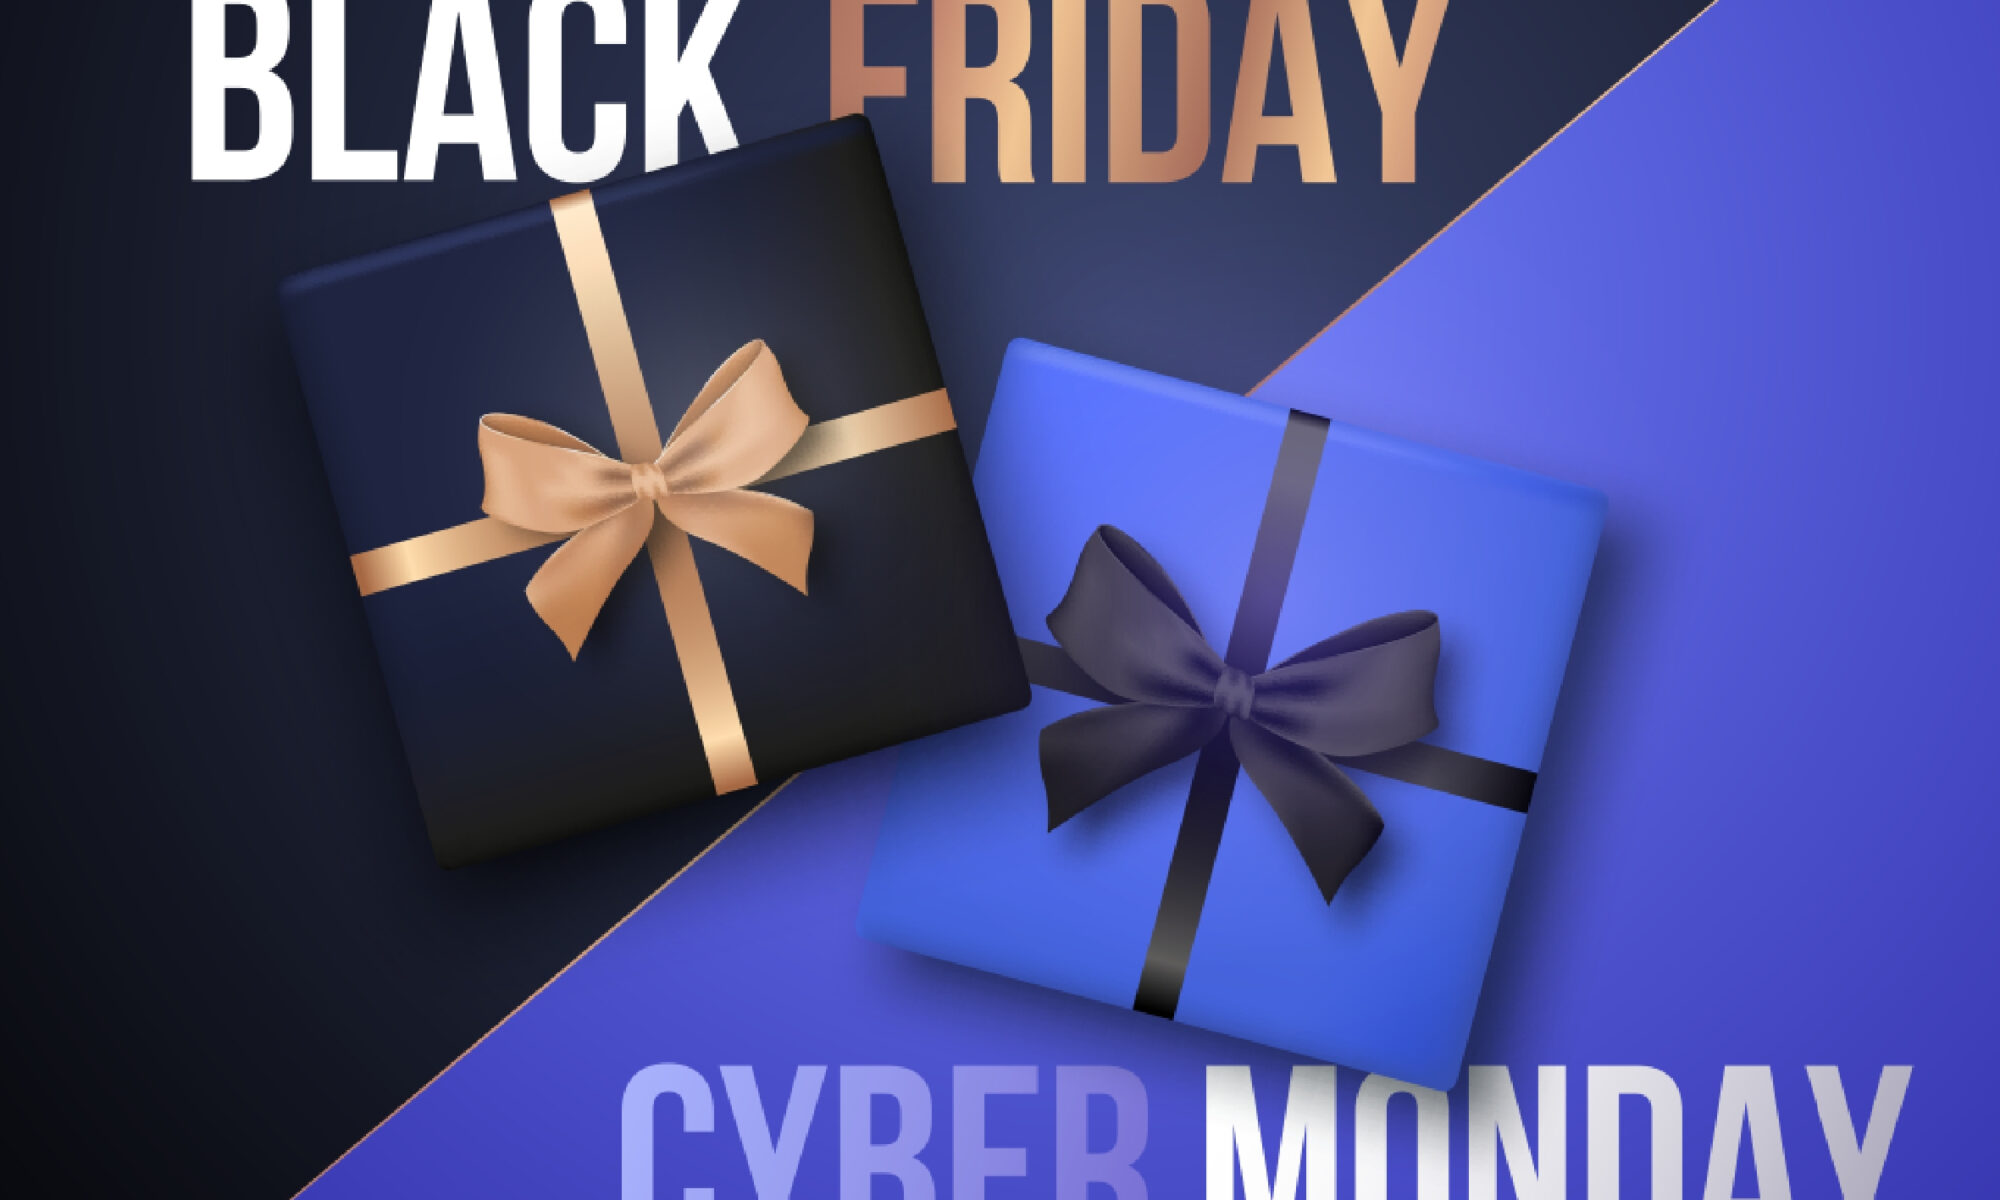 Black Friday and Cyber Monday Flash Sale Sign from a Fulfillment Warehouse for eCommerce Customers